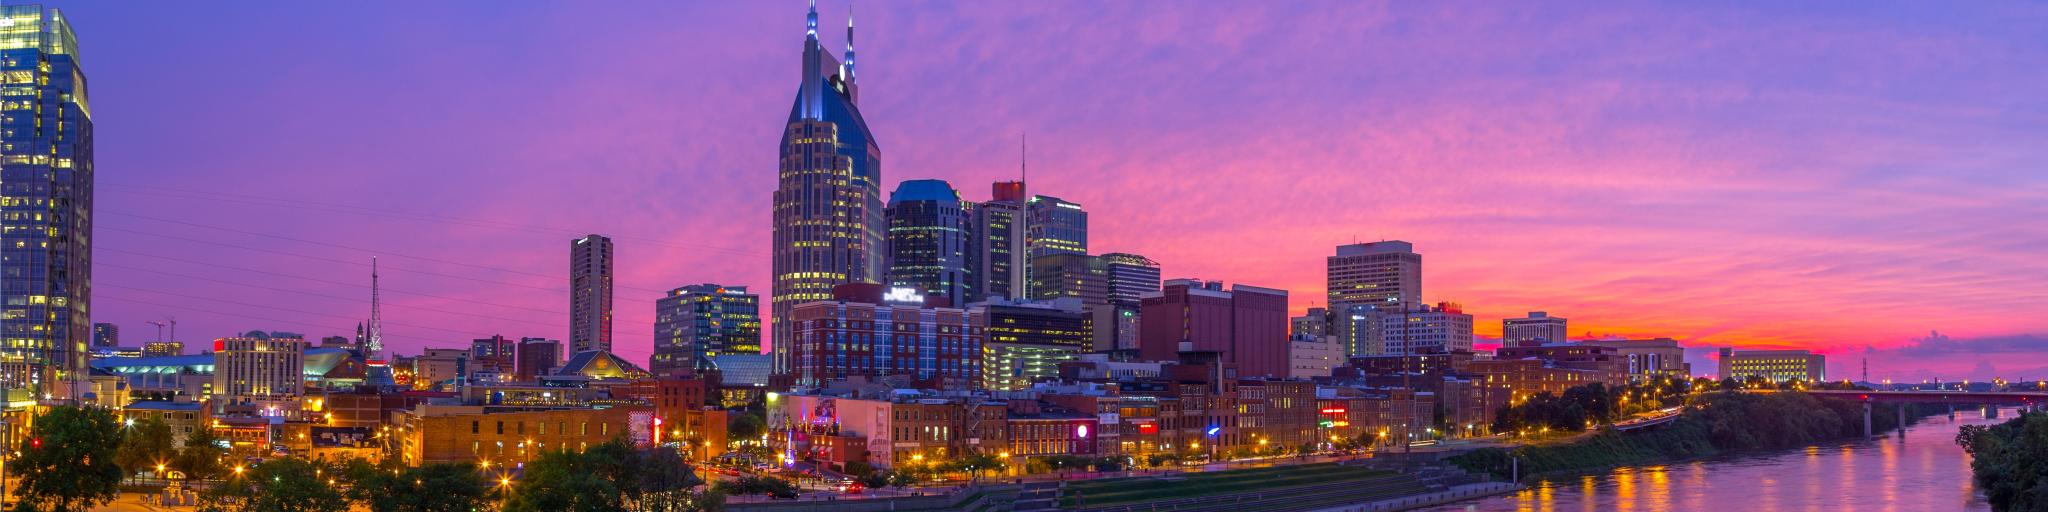 Nashville, Tennessee, USA skyline taken at early evening with pink skies.